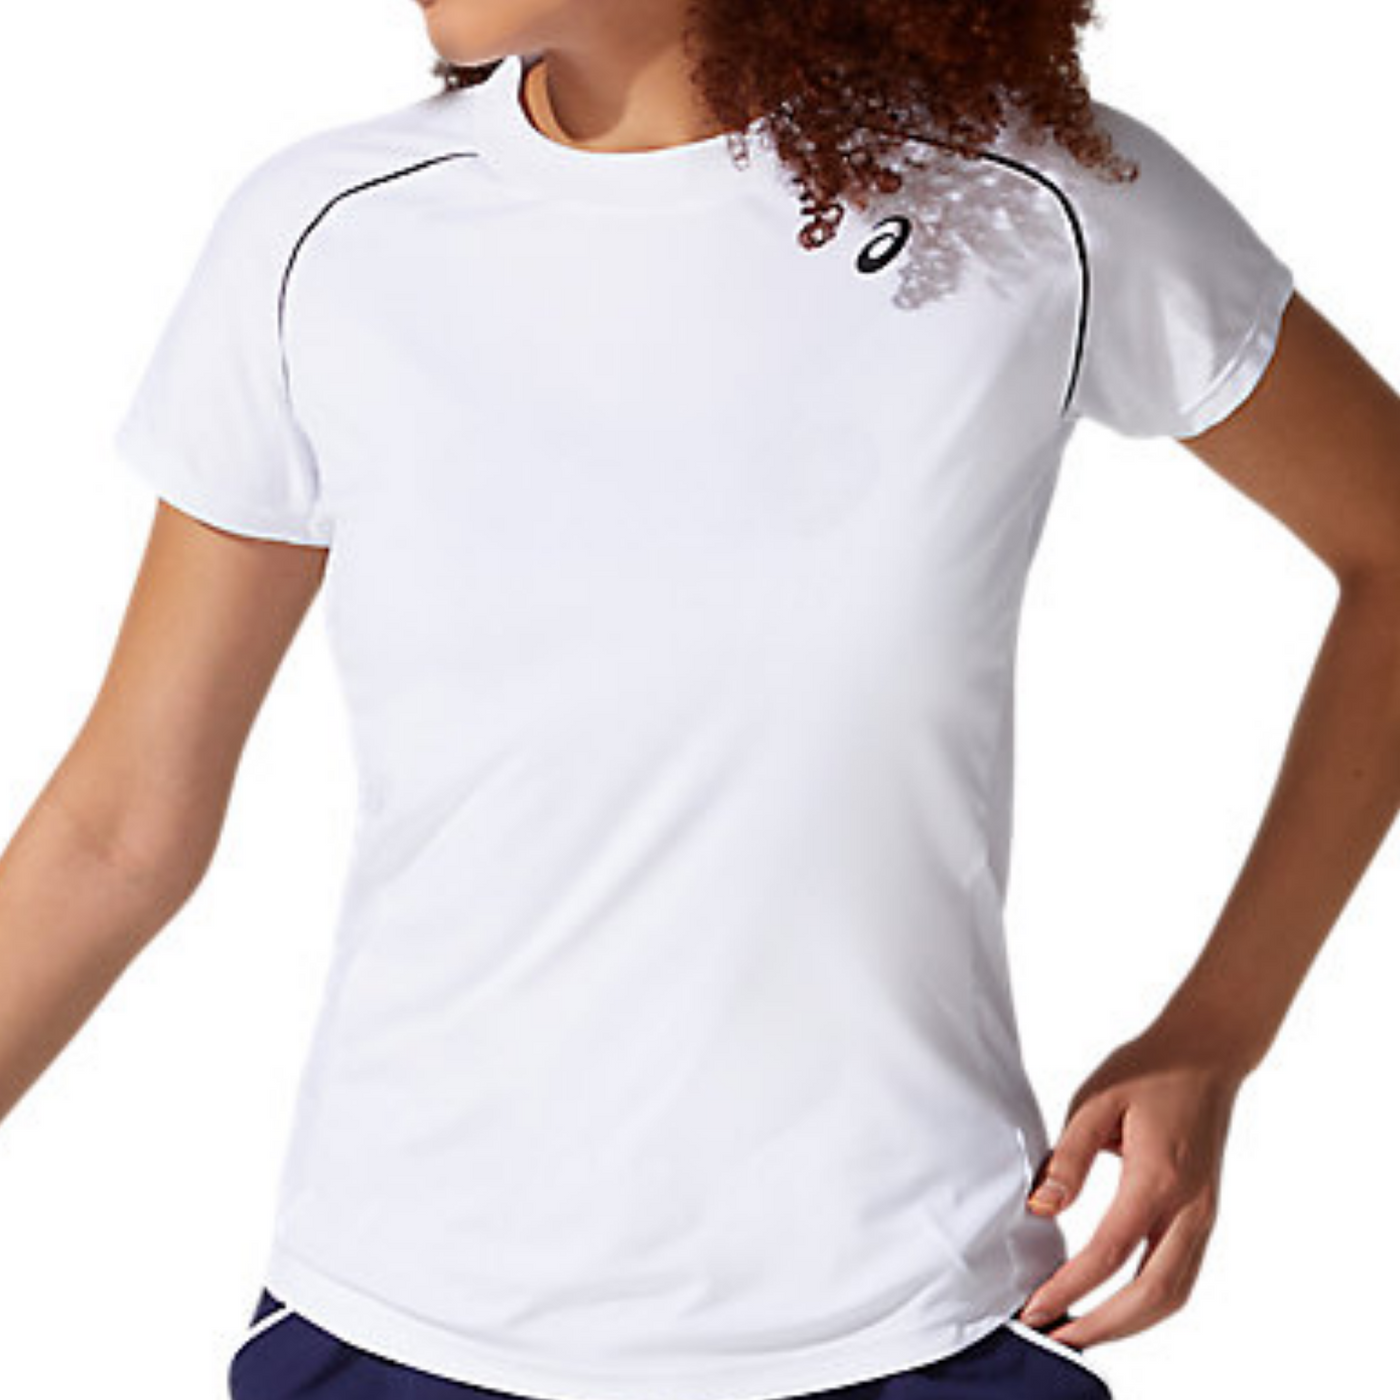 Asics Womens Court Piping SS Top - Brilliant White